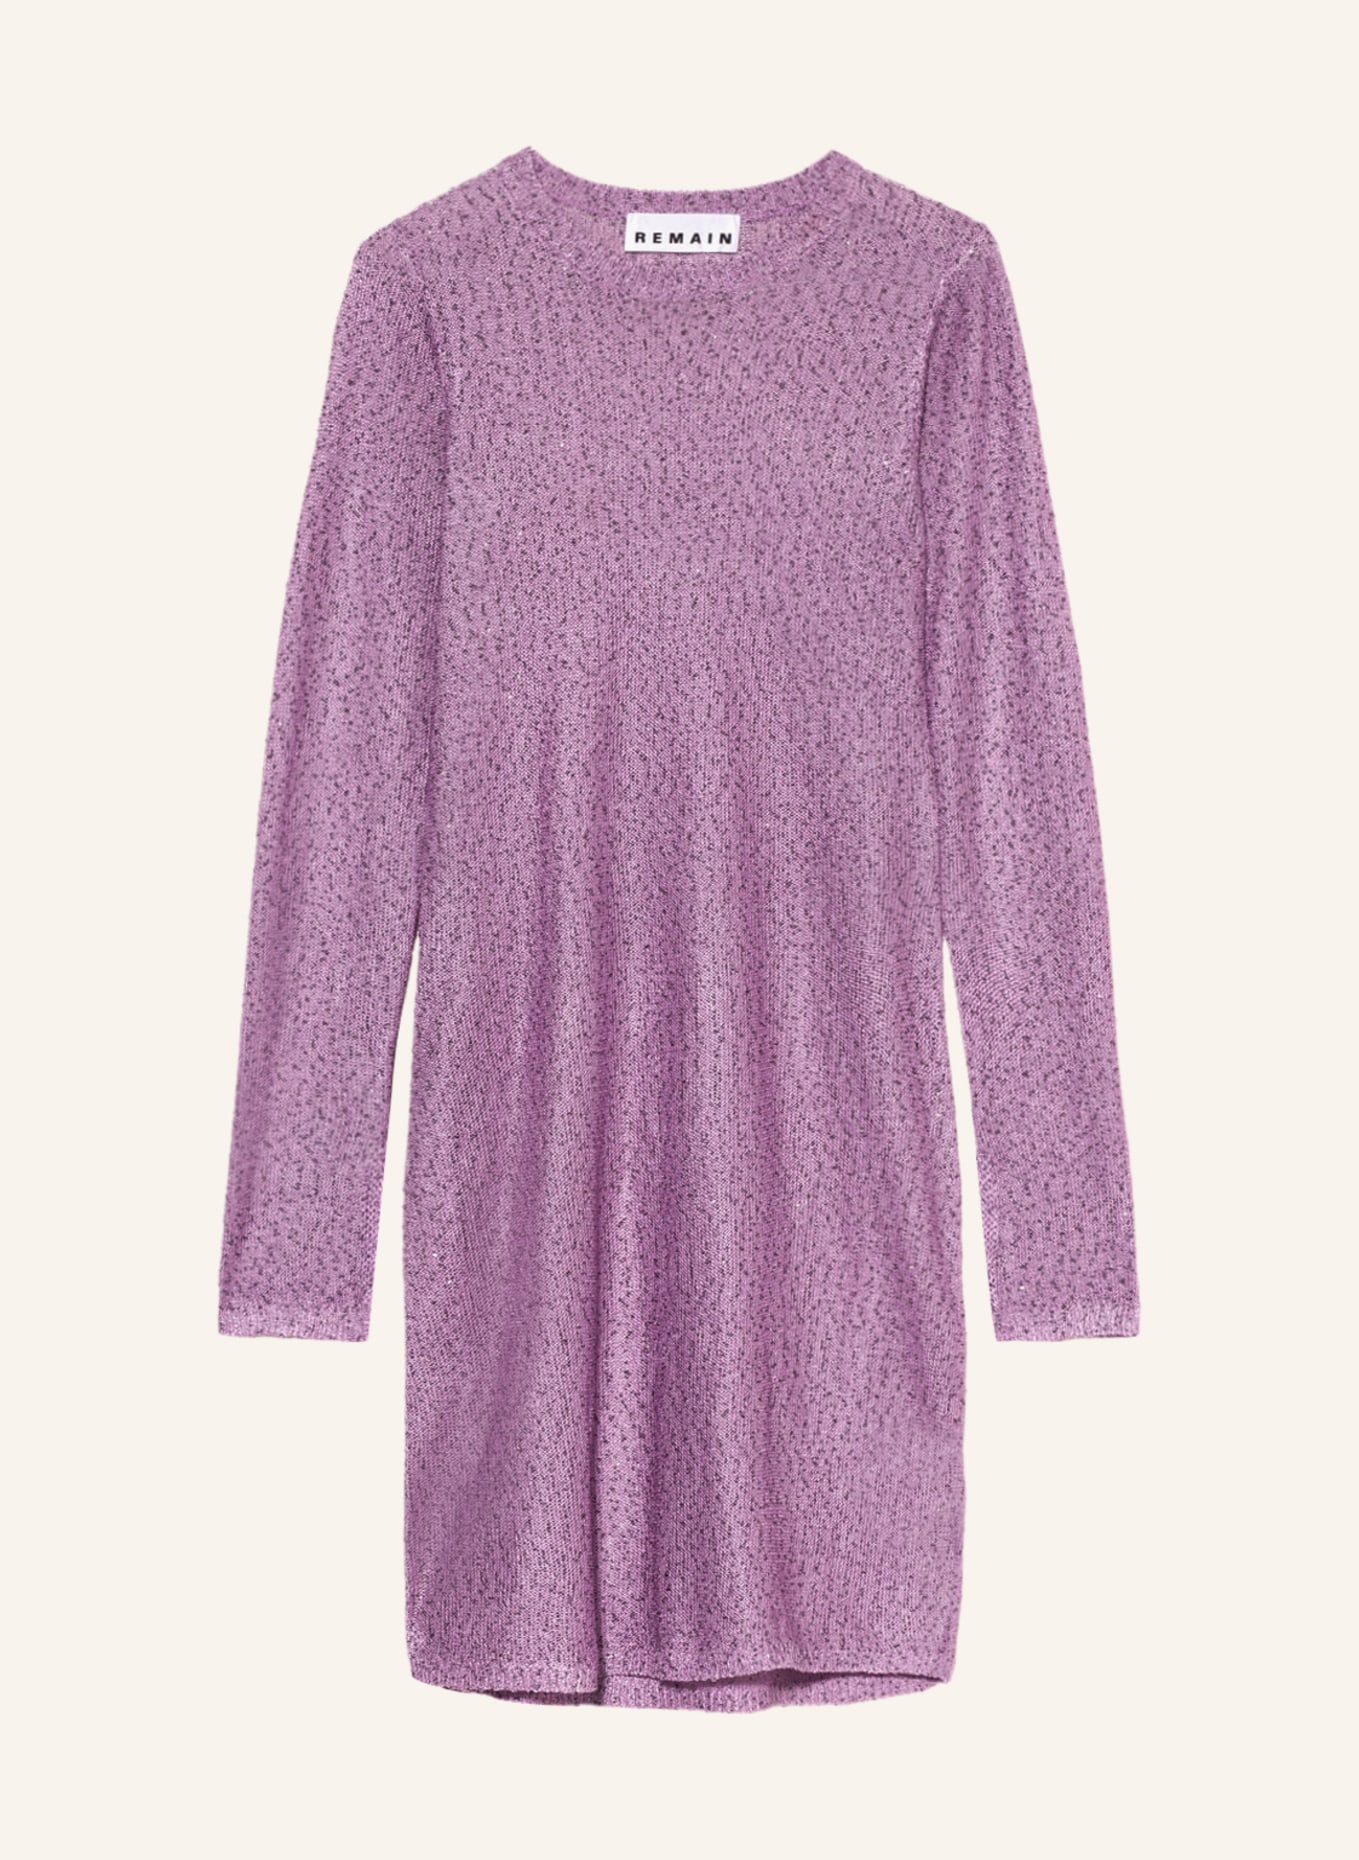 REMAIN Knit dress with sequins, Color: LIGHT PURPLE/ DARK GRAY (Image 1)